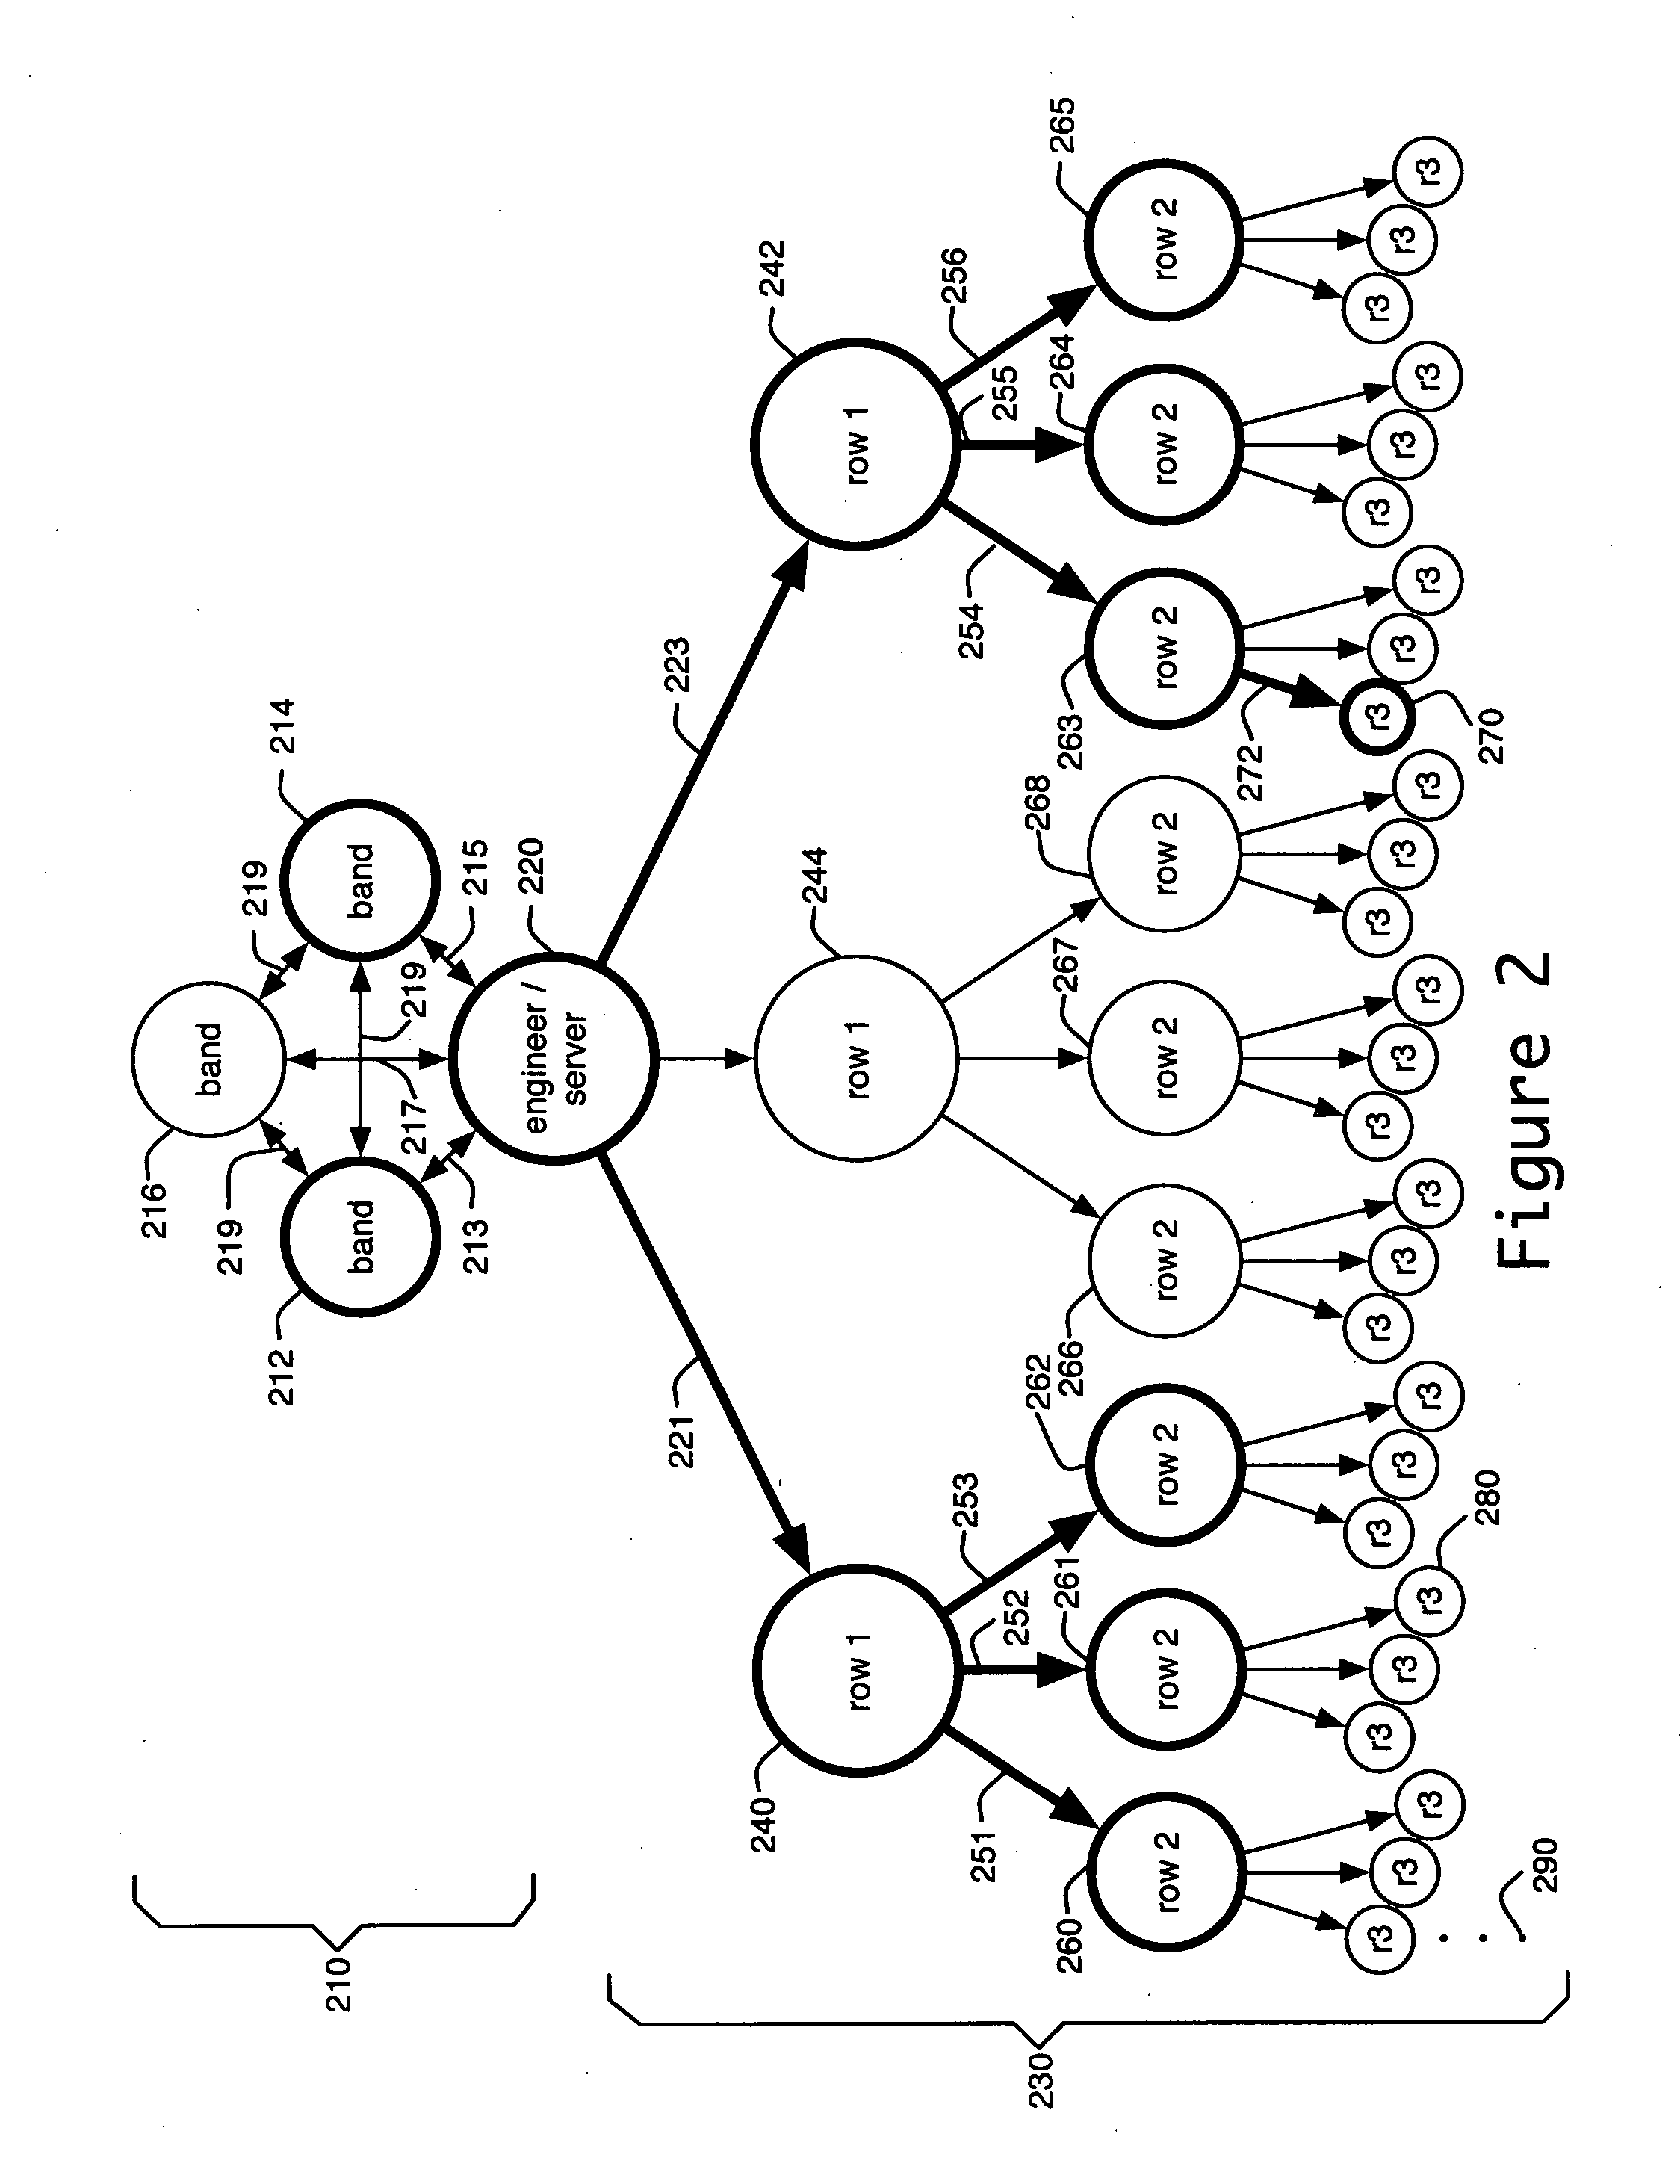 Method and apparatus for virtual auditorium usable for a conference call or remote live presentation with audience response thereto